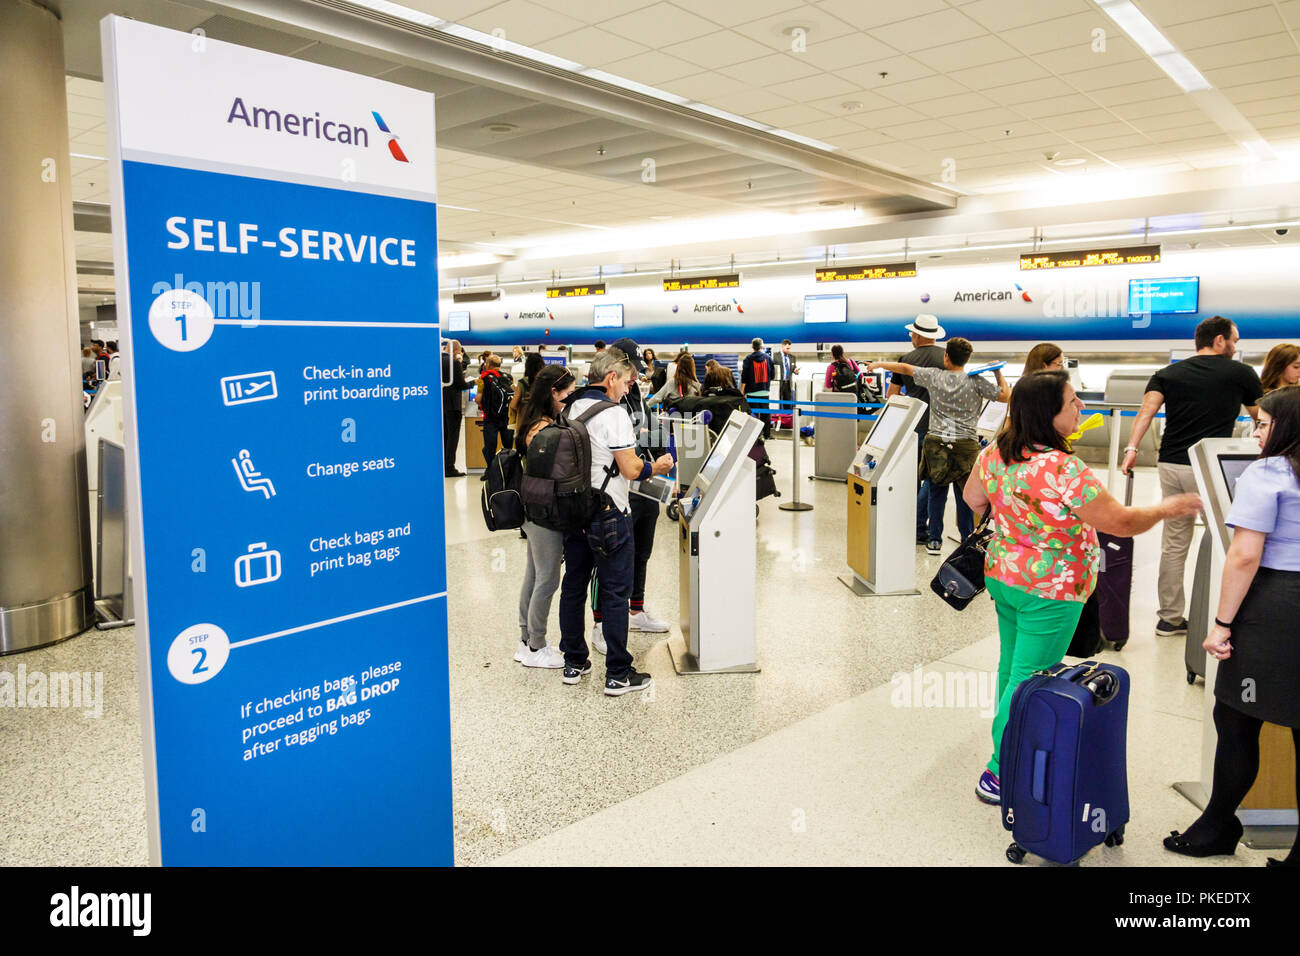 Miami Florida,International Airport MIA,terminal gate,American Airlines,self-service check-in,kiosk,instruction poster,FL180813004 Stock Photo